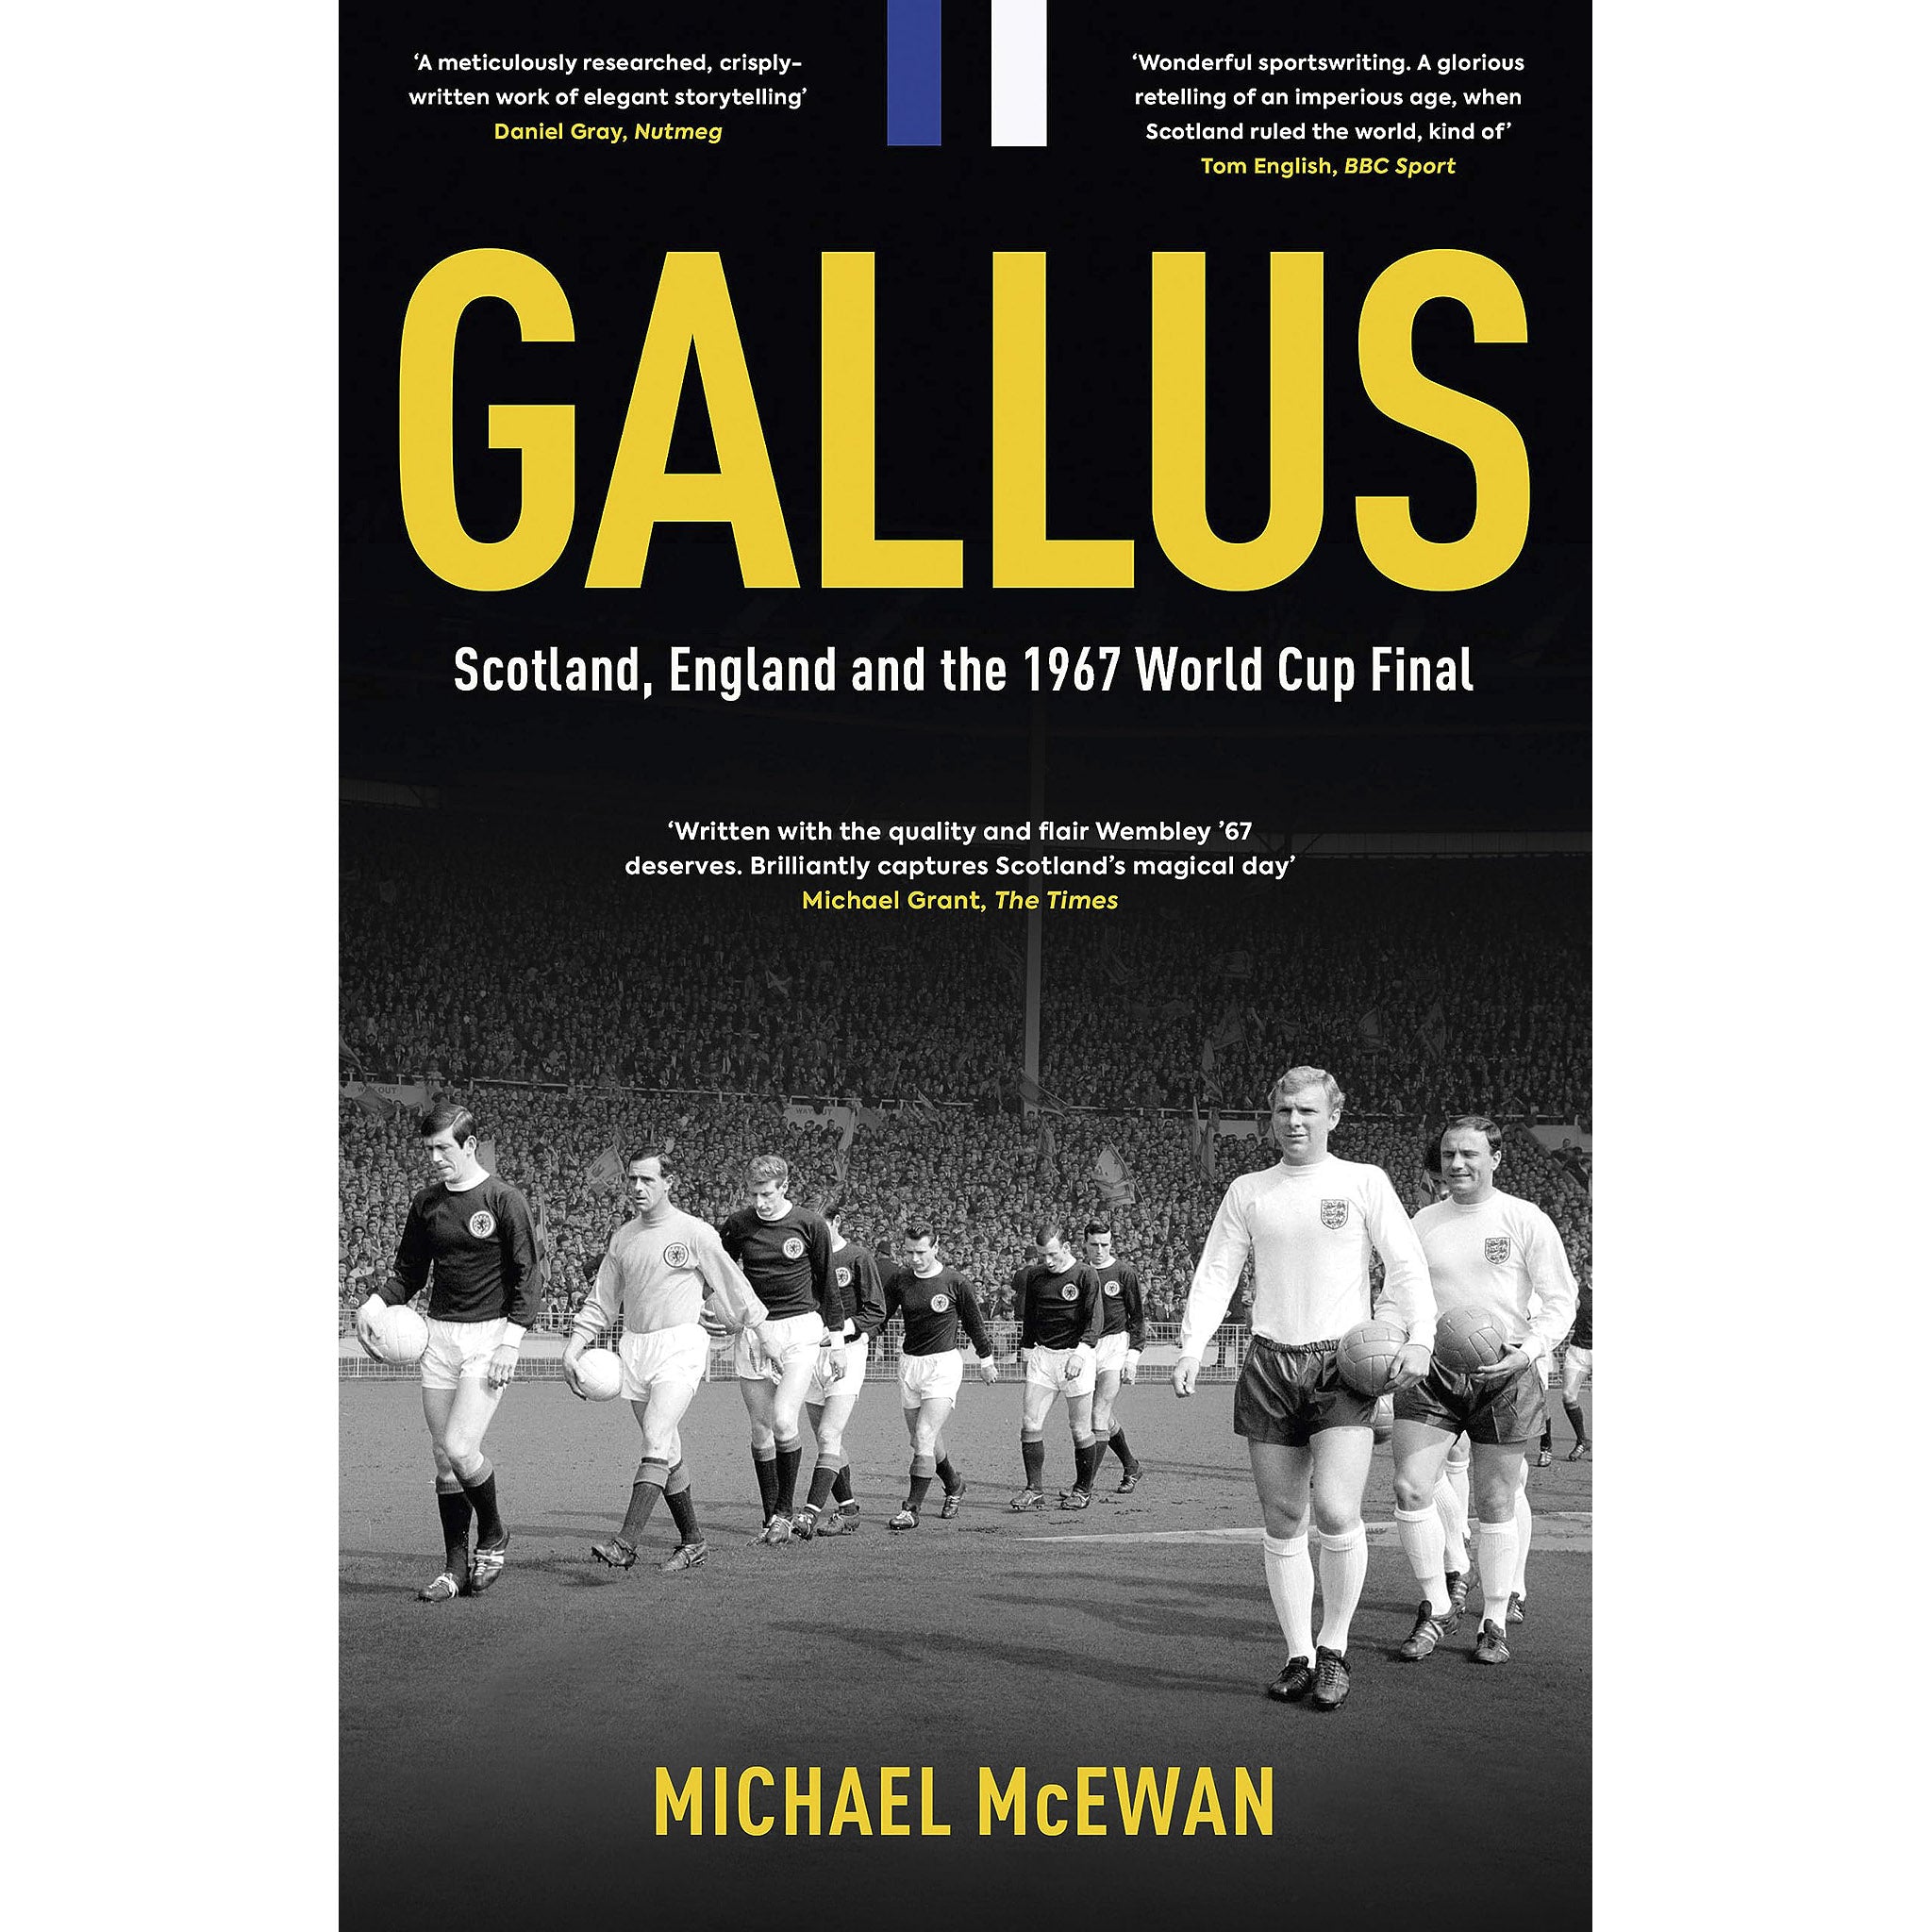 Gallus – Scotland, England and the 1967 World Cup Final